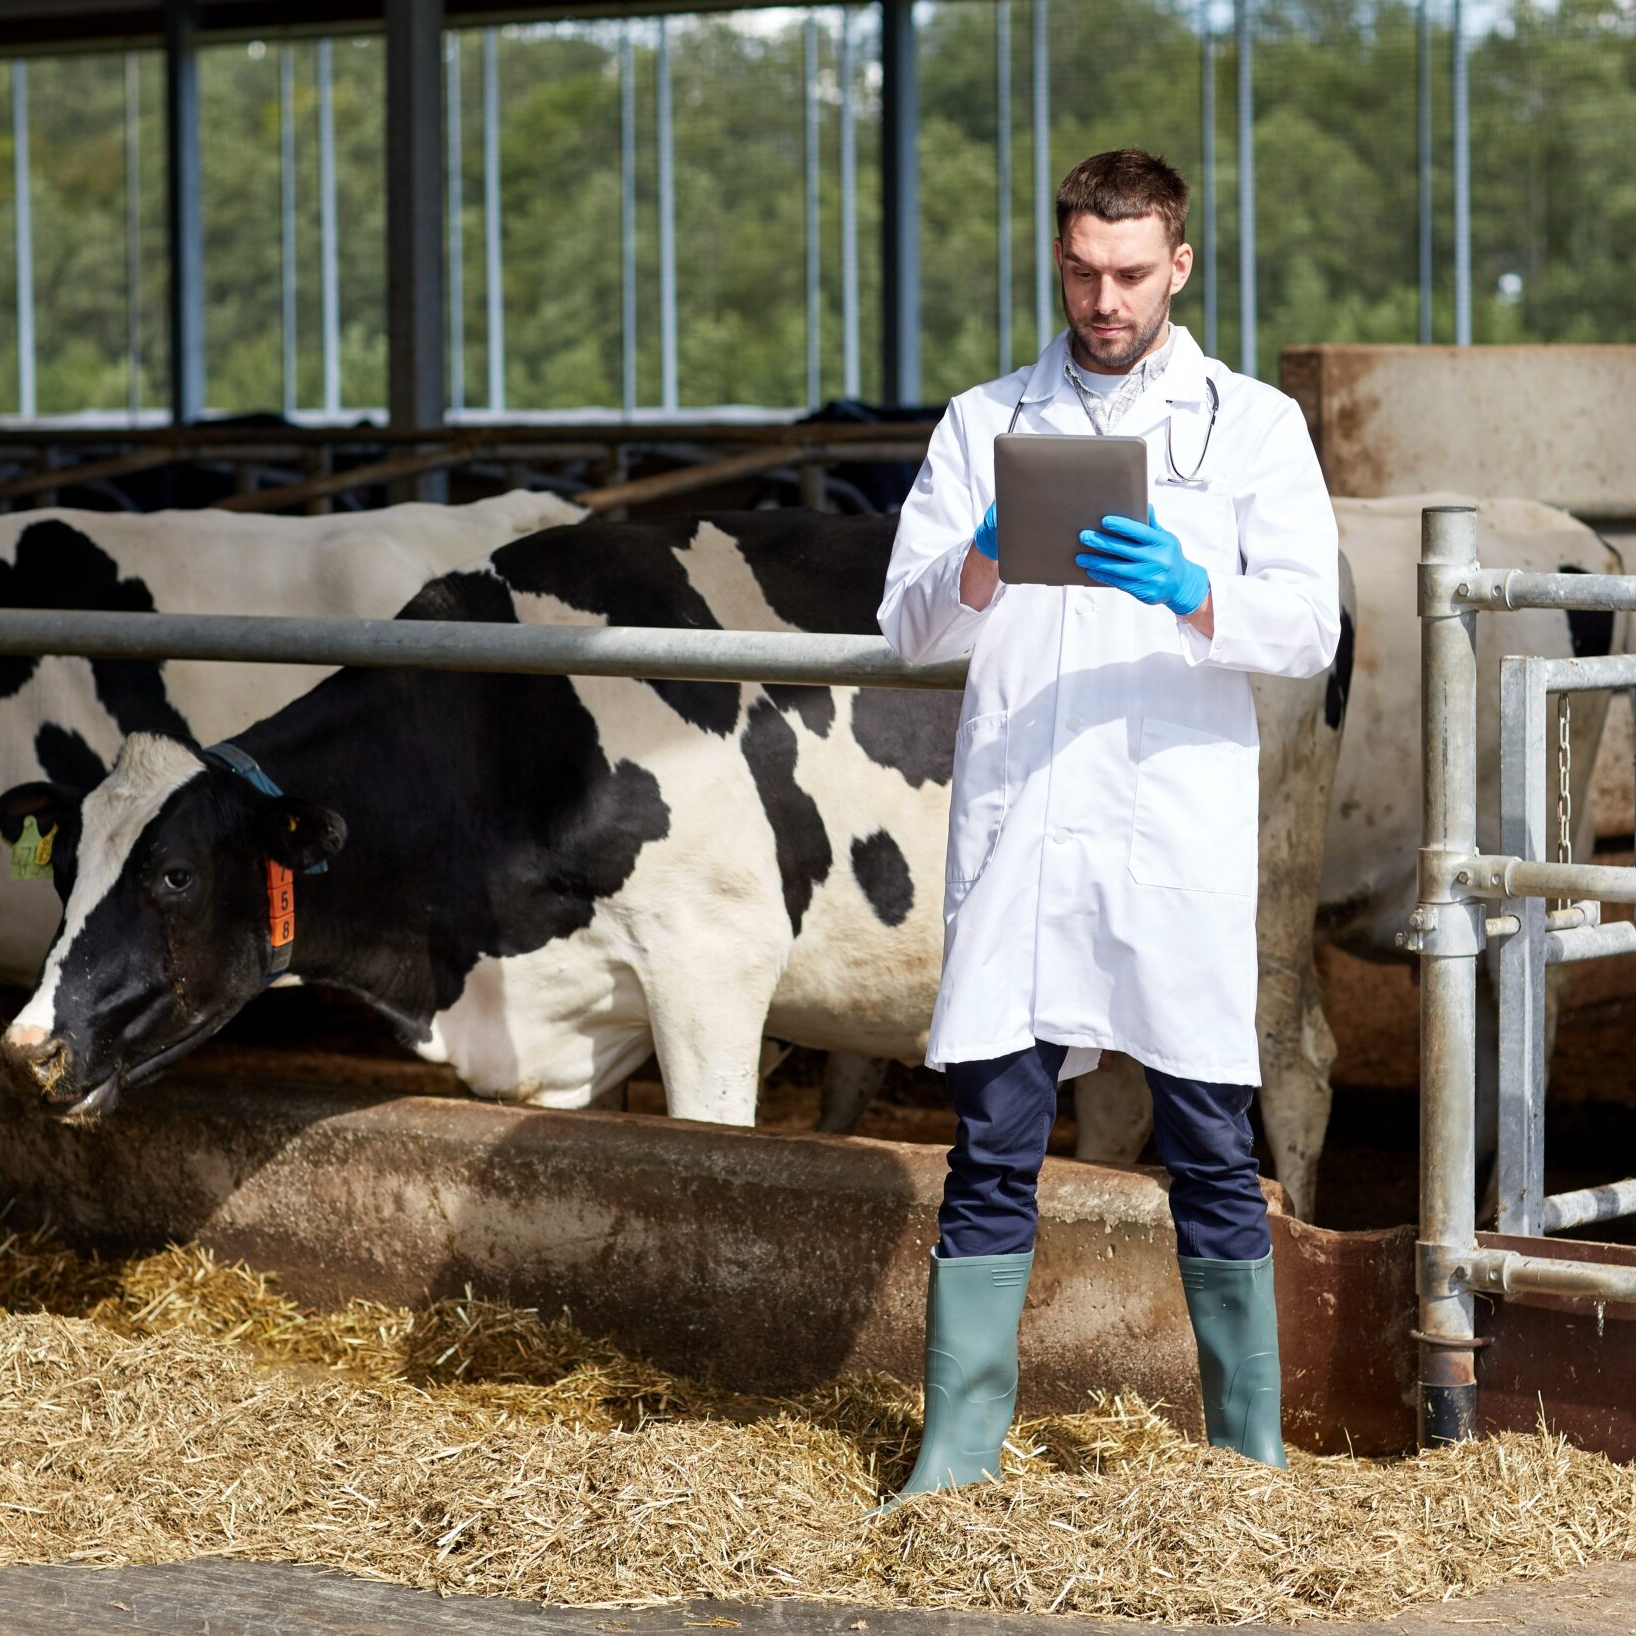 Diluting the role of USDA veterinarians is a mistake according to those on the job at FSIS